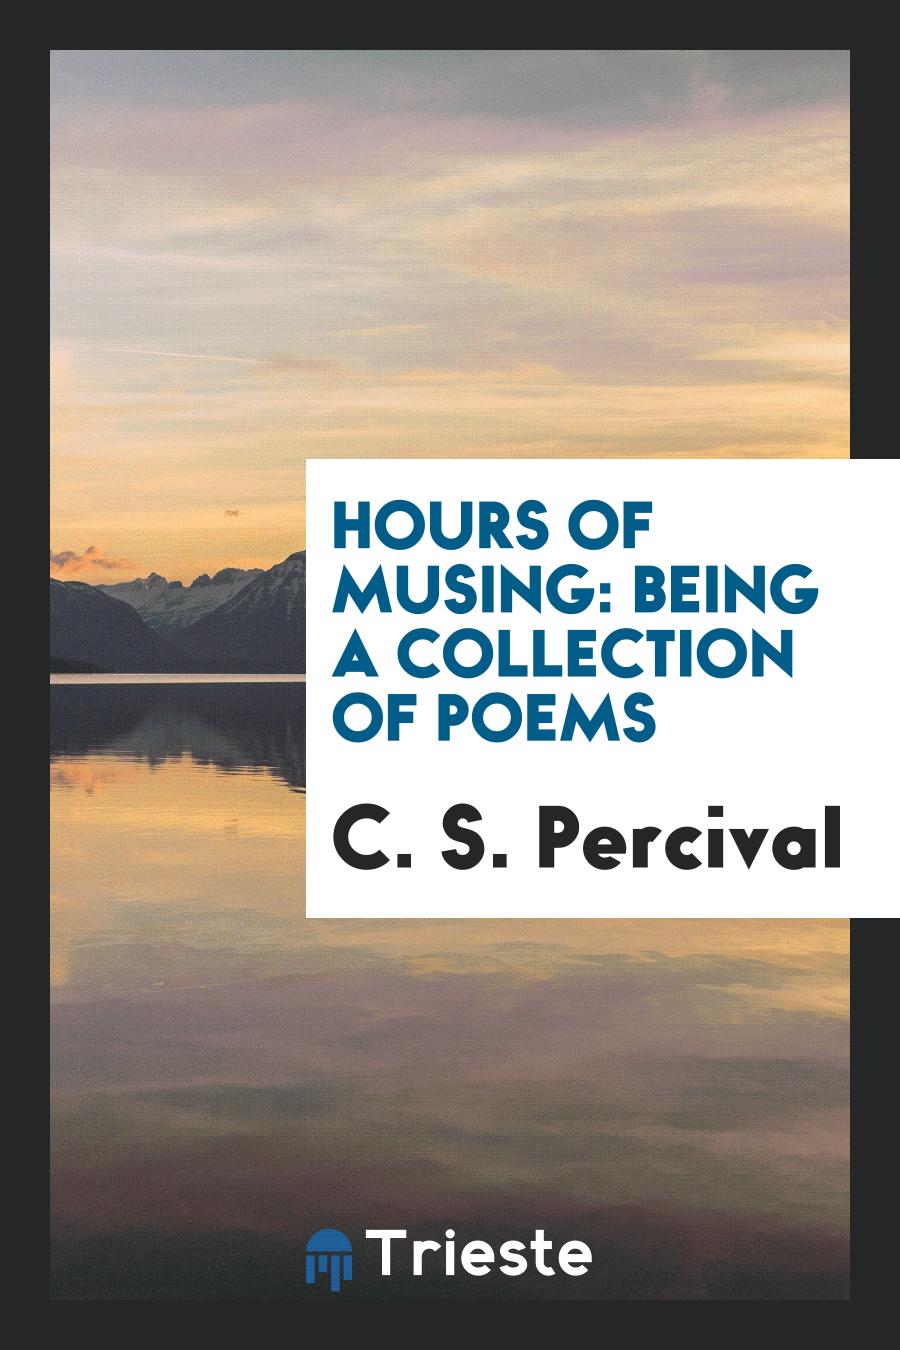 Hours of Musing: Being a Collection of Poems